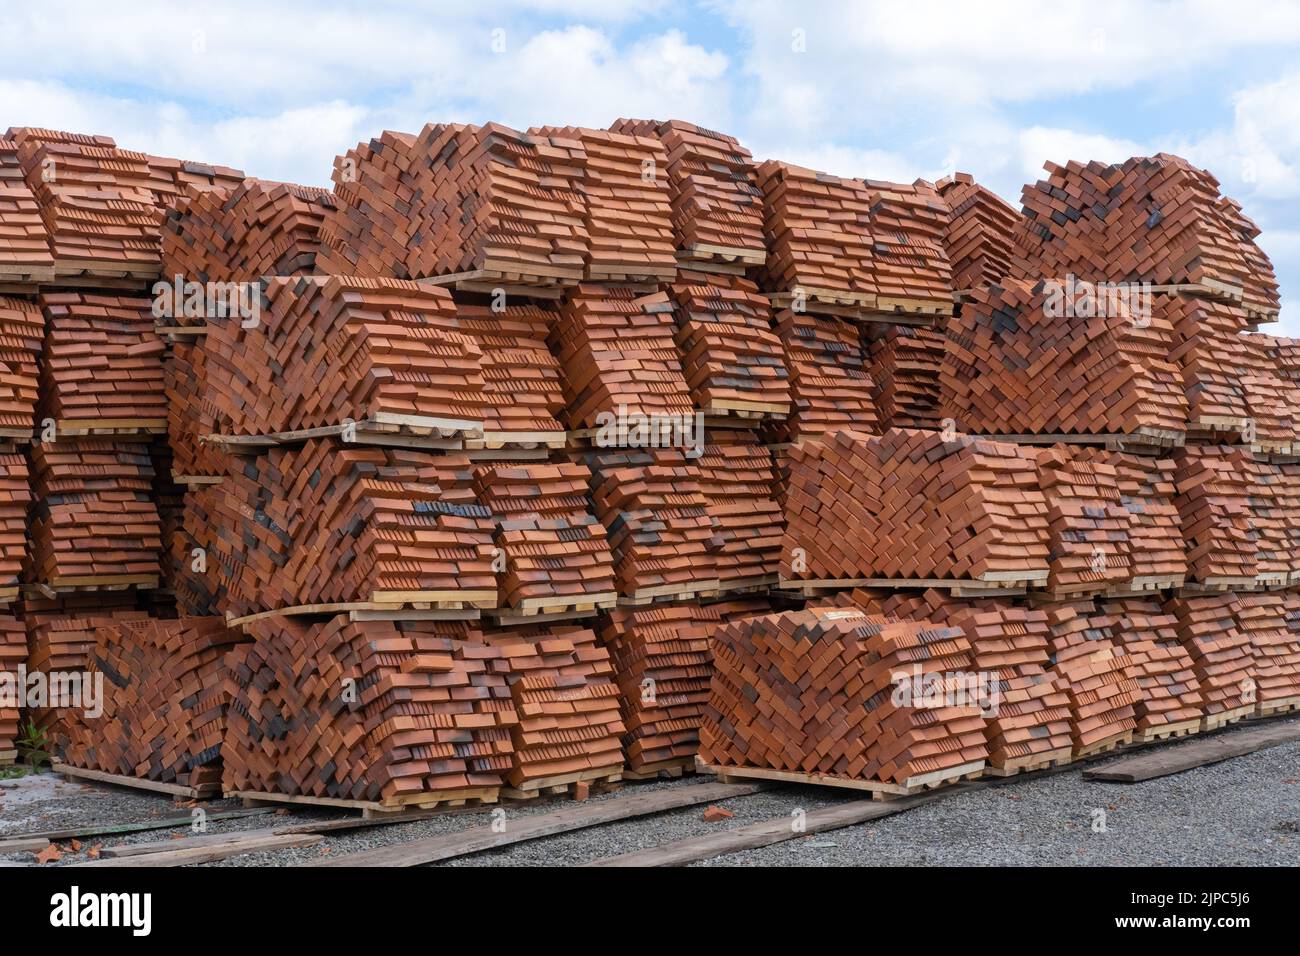 Red clay bricks are stacked on wooden pallets. Production of bricks from clay. Red perforated bricks with rectangular holes on wooden pallets in an op Stock Photo